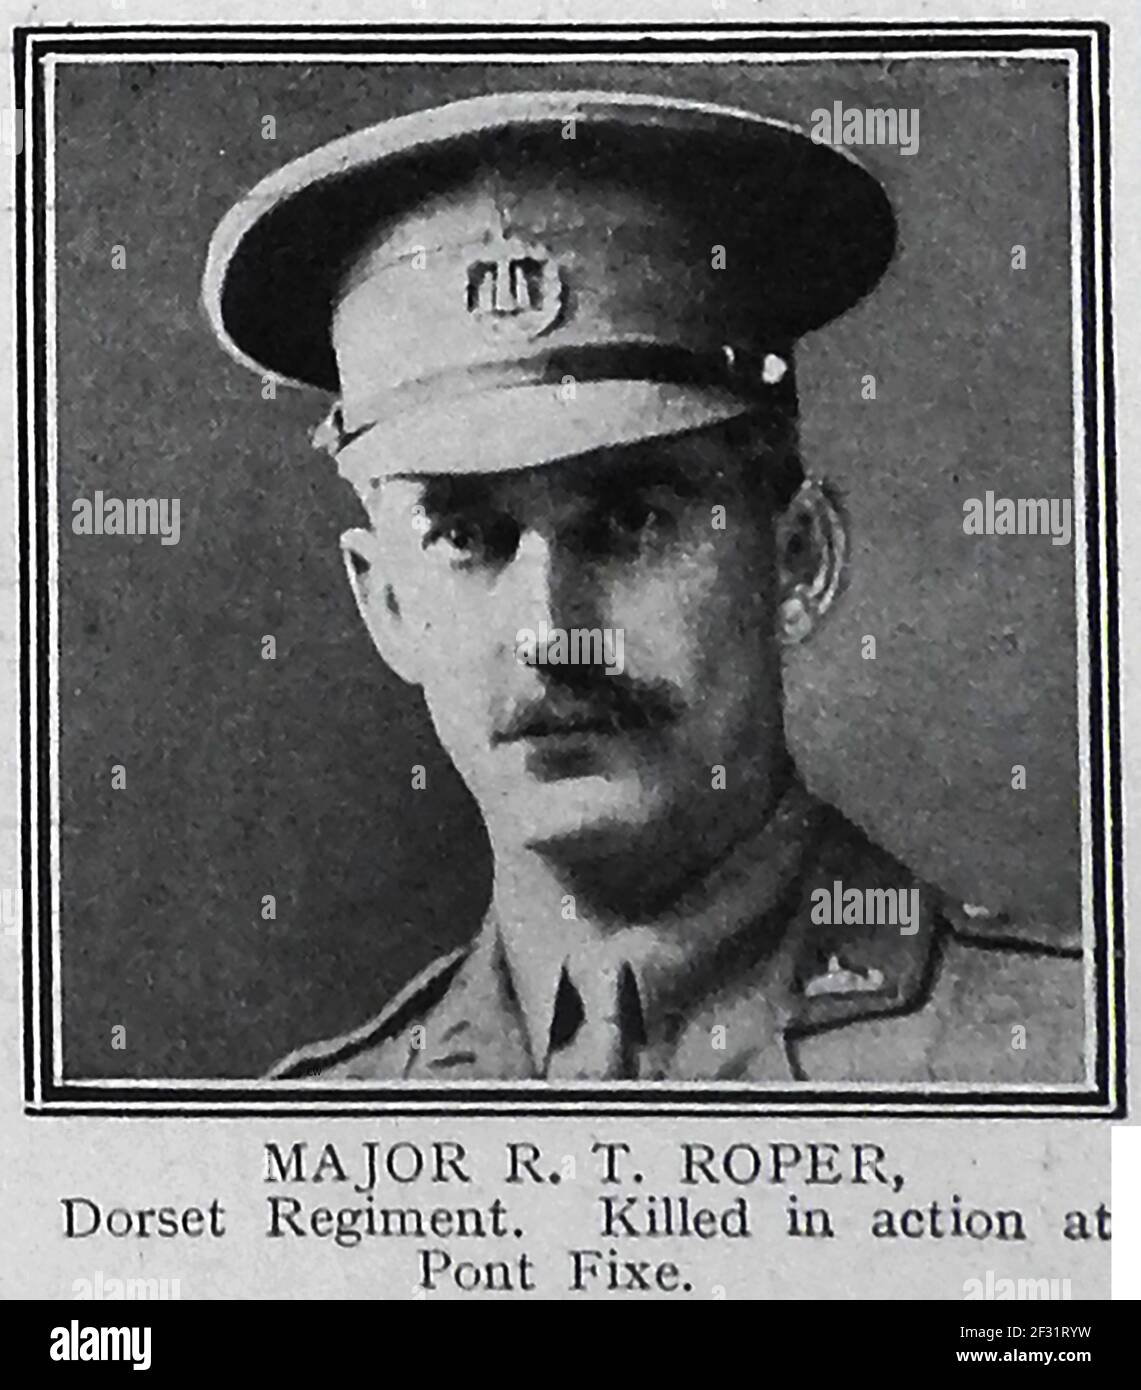 MAJOR R T ROPER of the Dorset Regiment who was killed in action at Pont Fixe -  A printed portrait from a 1914-1915 role of honour page of those killed in action in World War One. Stock Photo